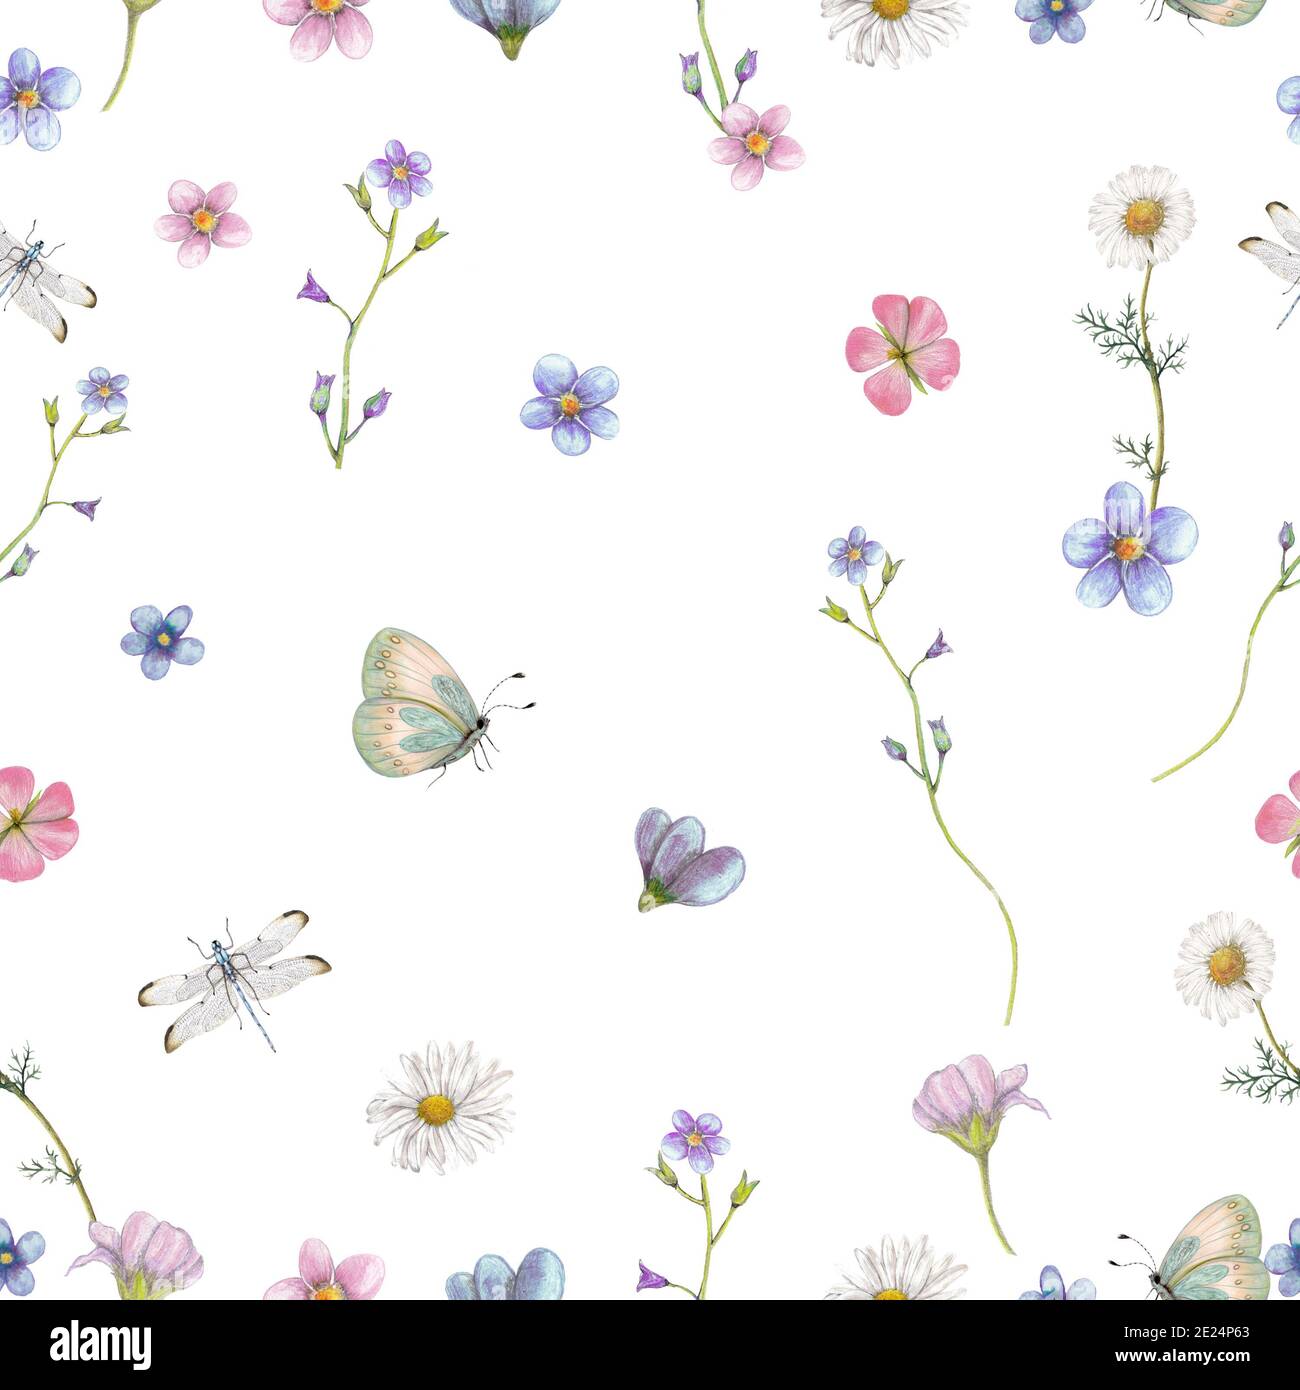 Garden wildflowers seamless pattern, Repeat floral pattern Stock Photo